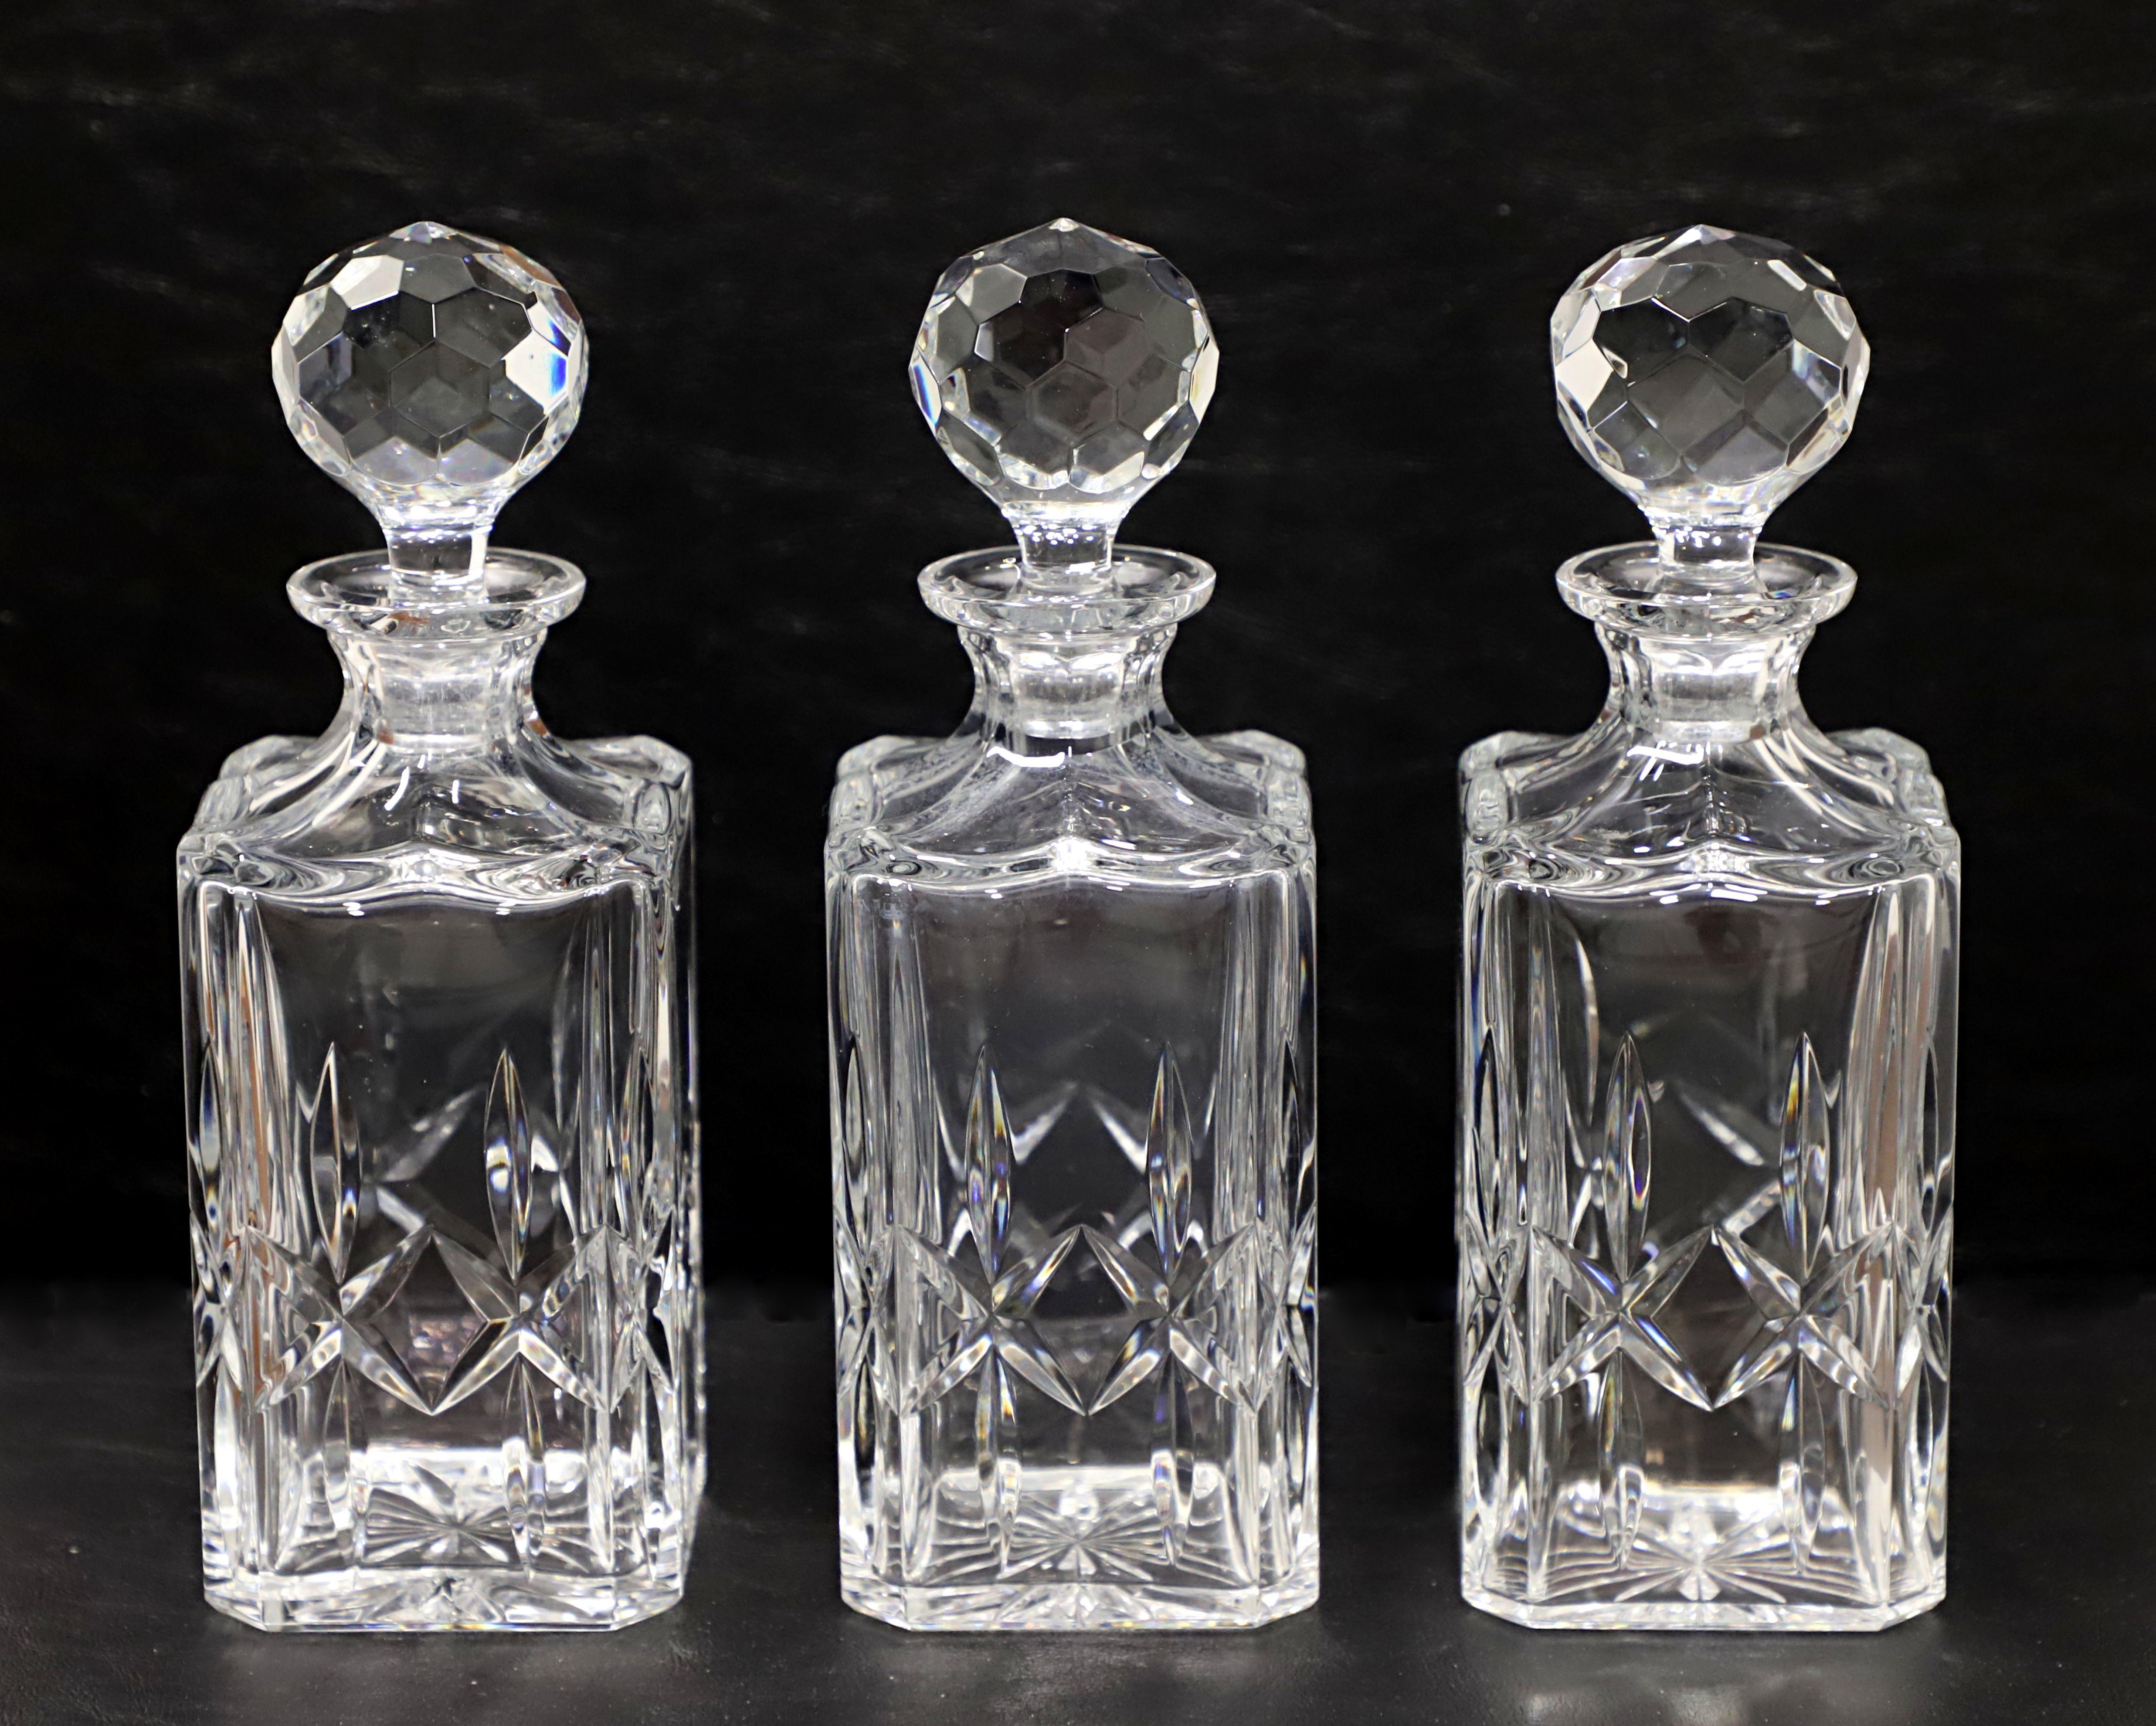 A trio of Late 20th Century crystal decanters by Atlantis Cristasia. Clear lead crystal decanters, square in shape, with same cut diamond pattern to each. Bubbled round shaped all crystal stopper. Made in Alcobaca, Portugal.

Measures:  3.5w 3.5d